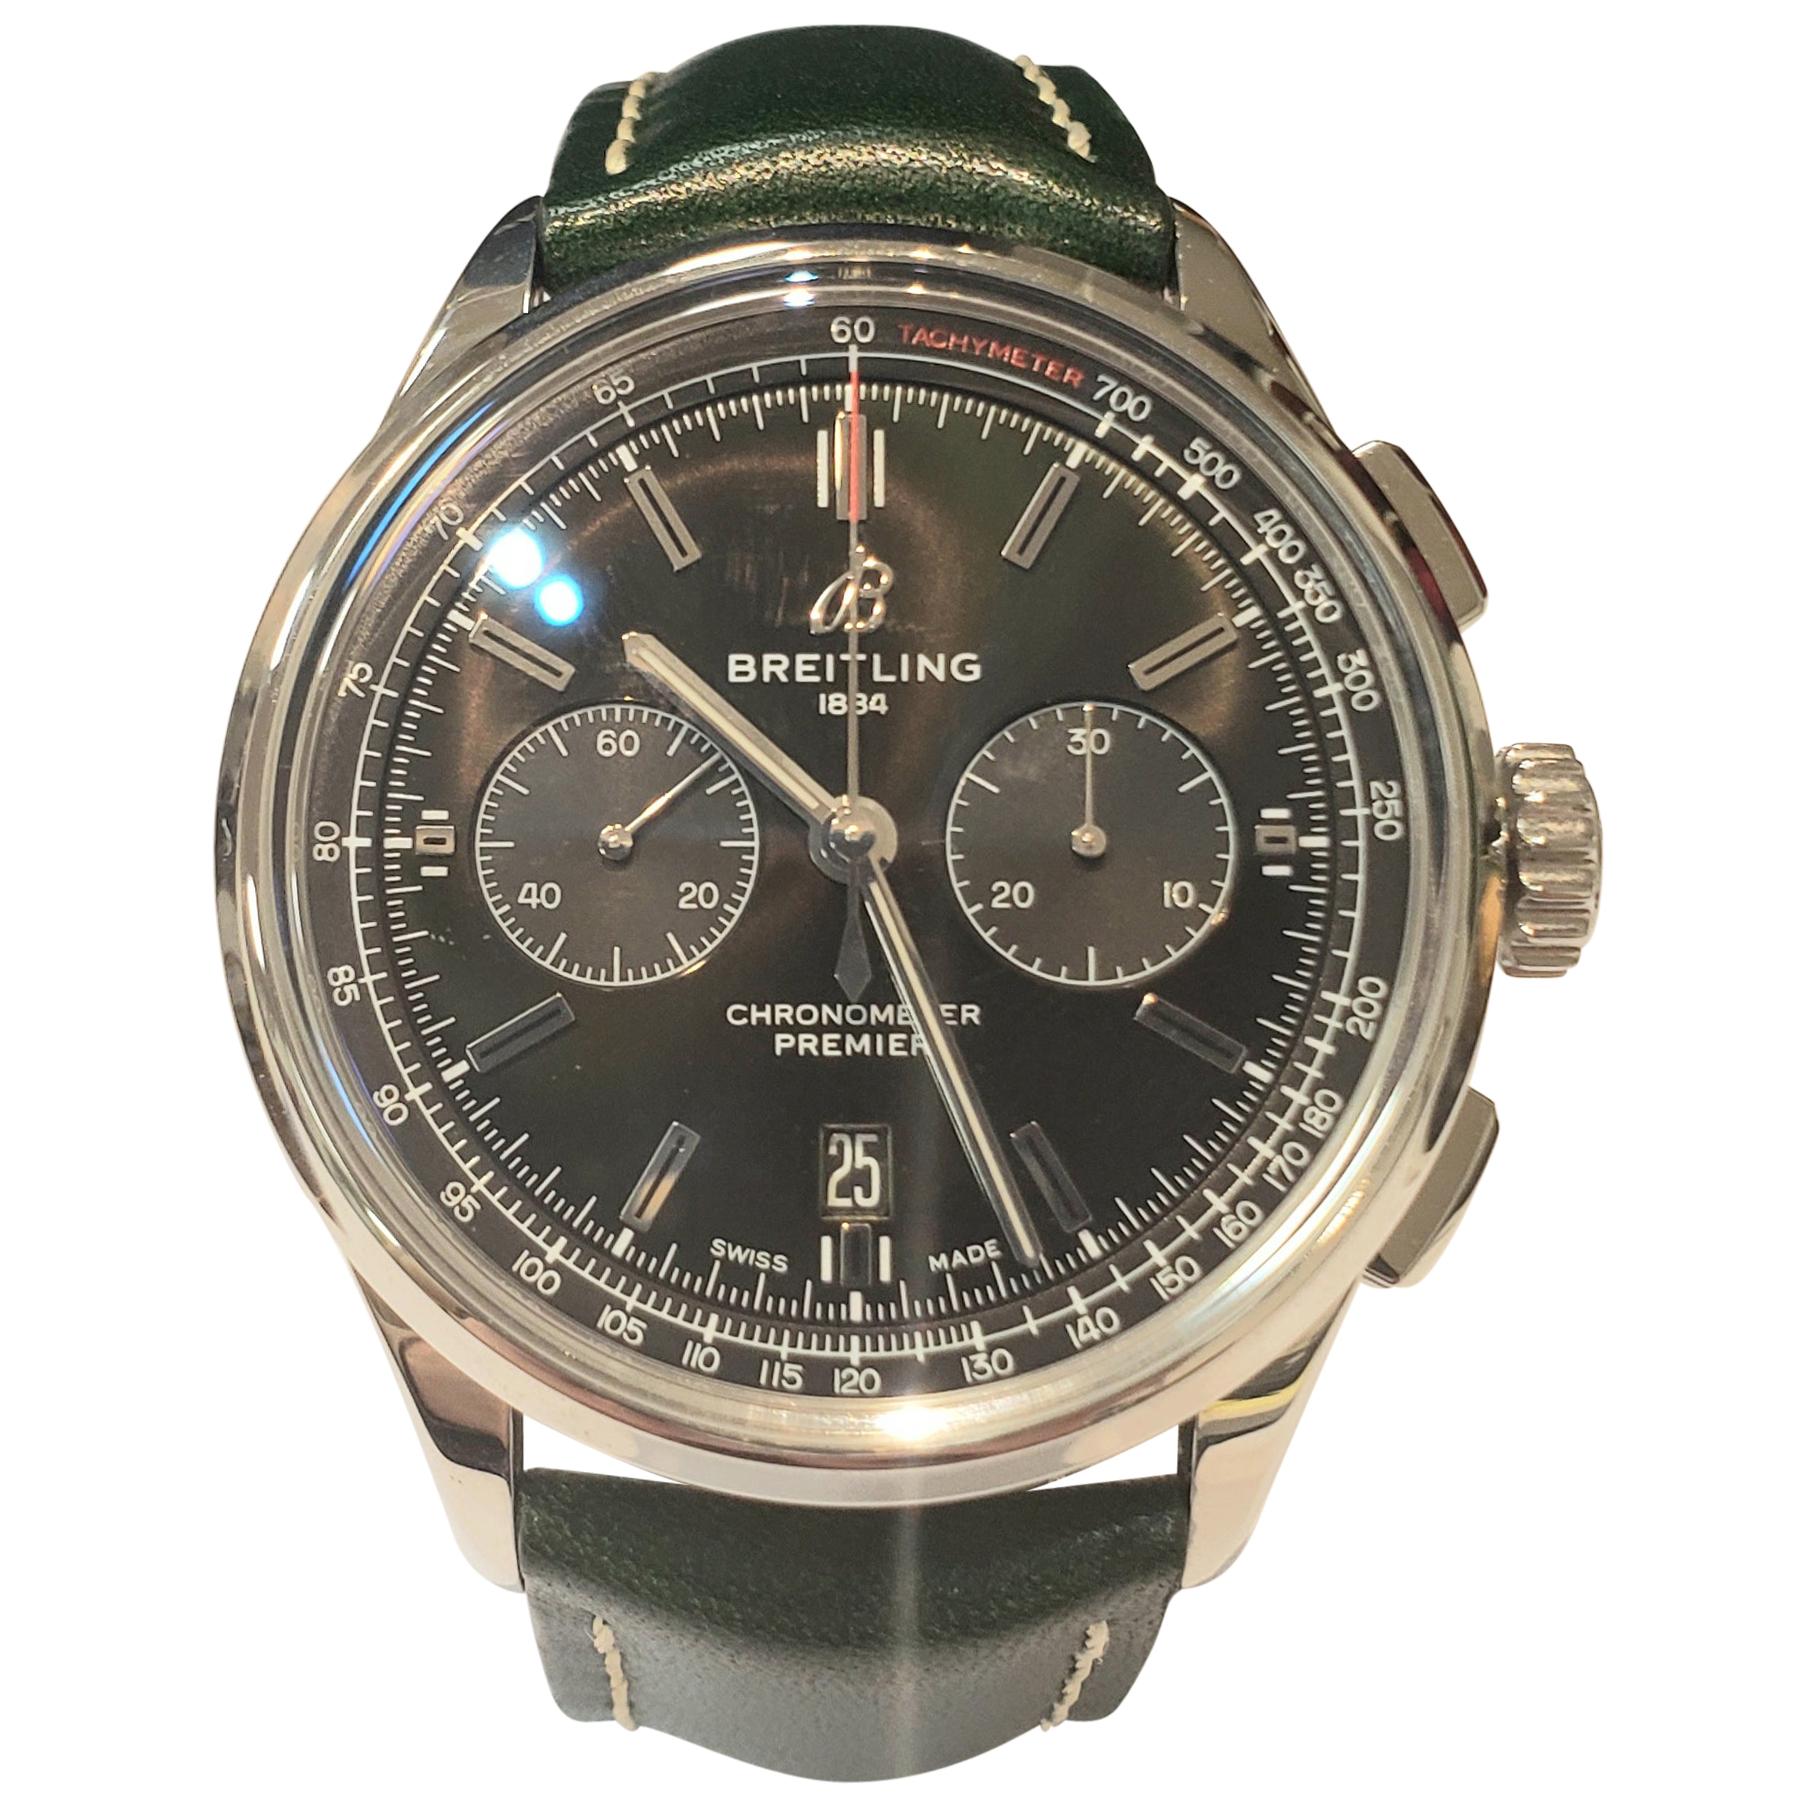 Breitling Premier B01 Chronograph 42 Bentley British Racing Green Watch New For Sale